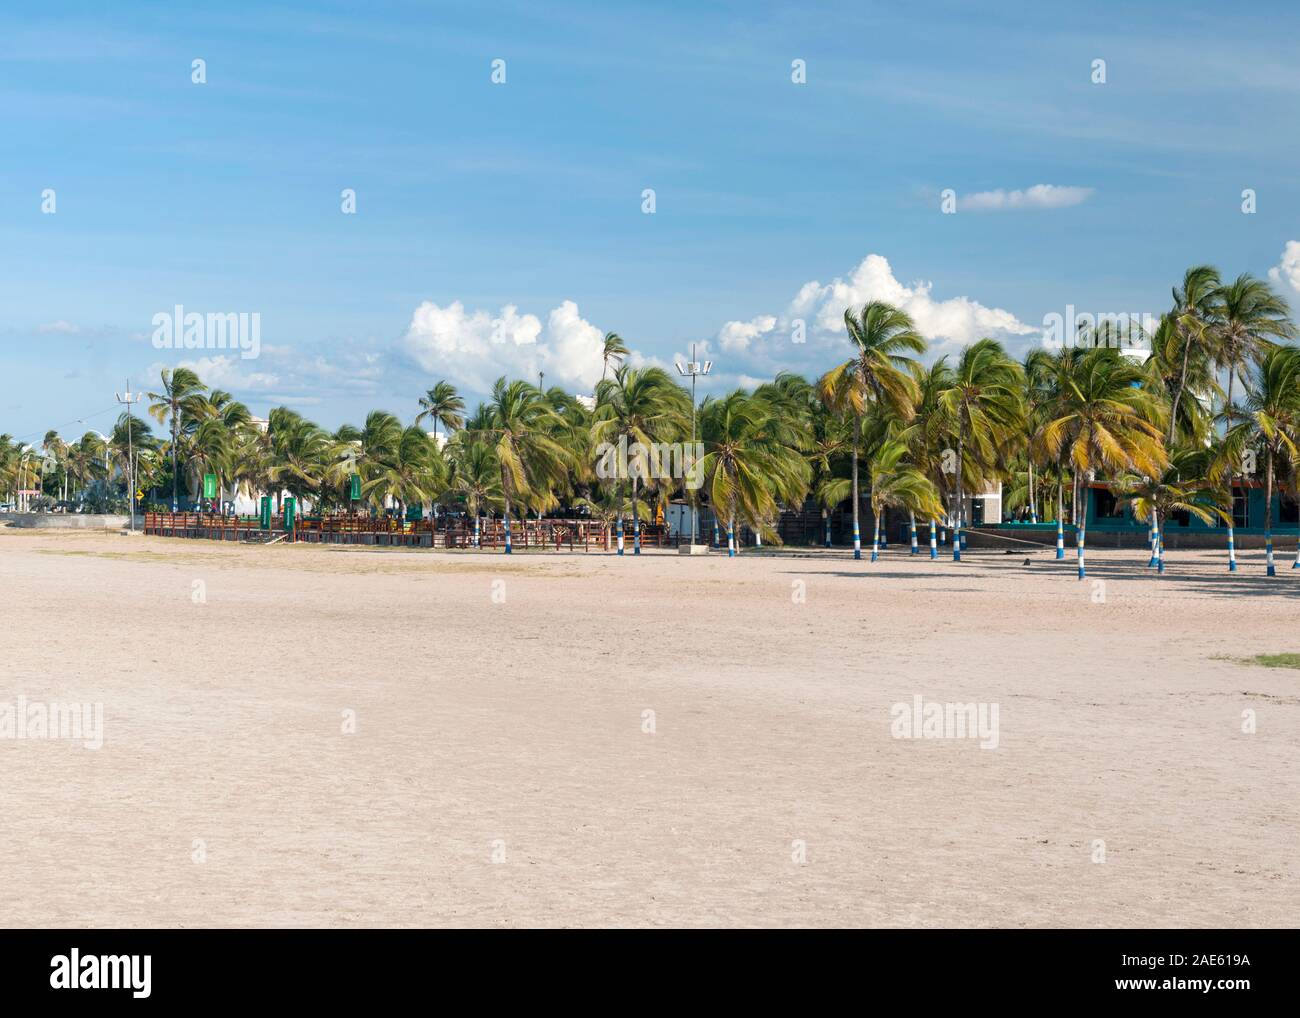 Plam trees on the beachfront of the town of Riohacha in the Guajira peninsula of northern Colombia. Stock Photo